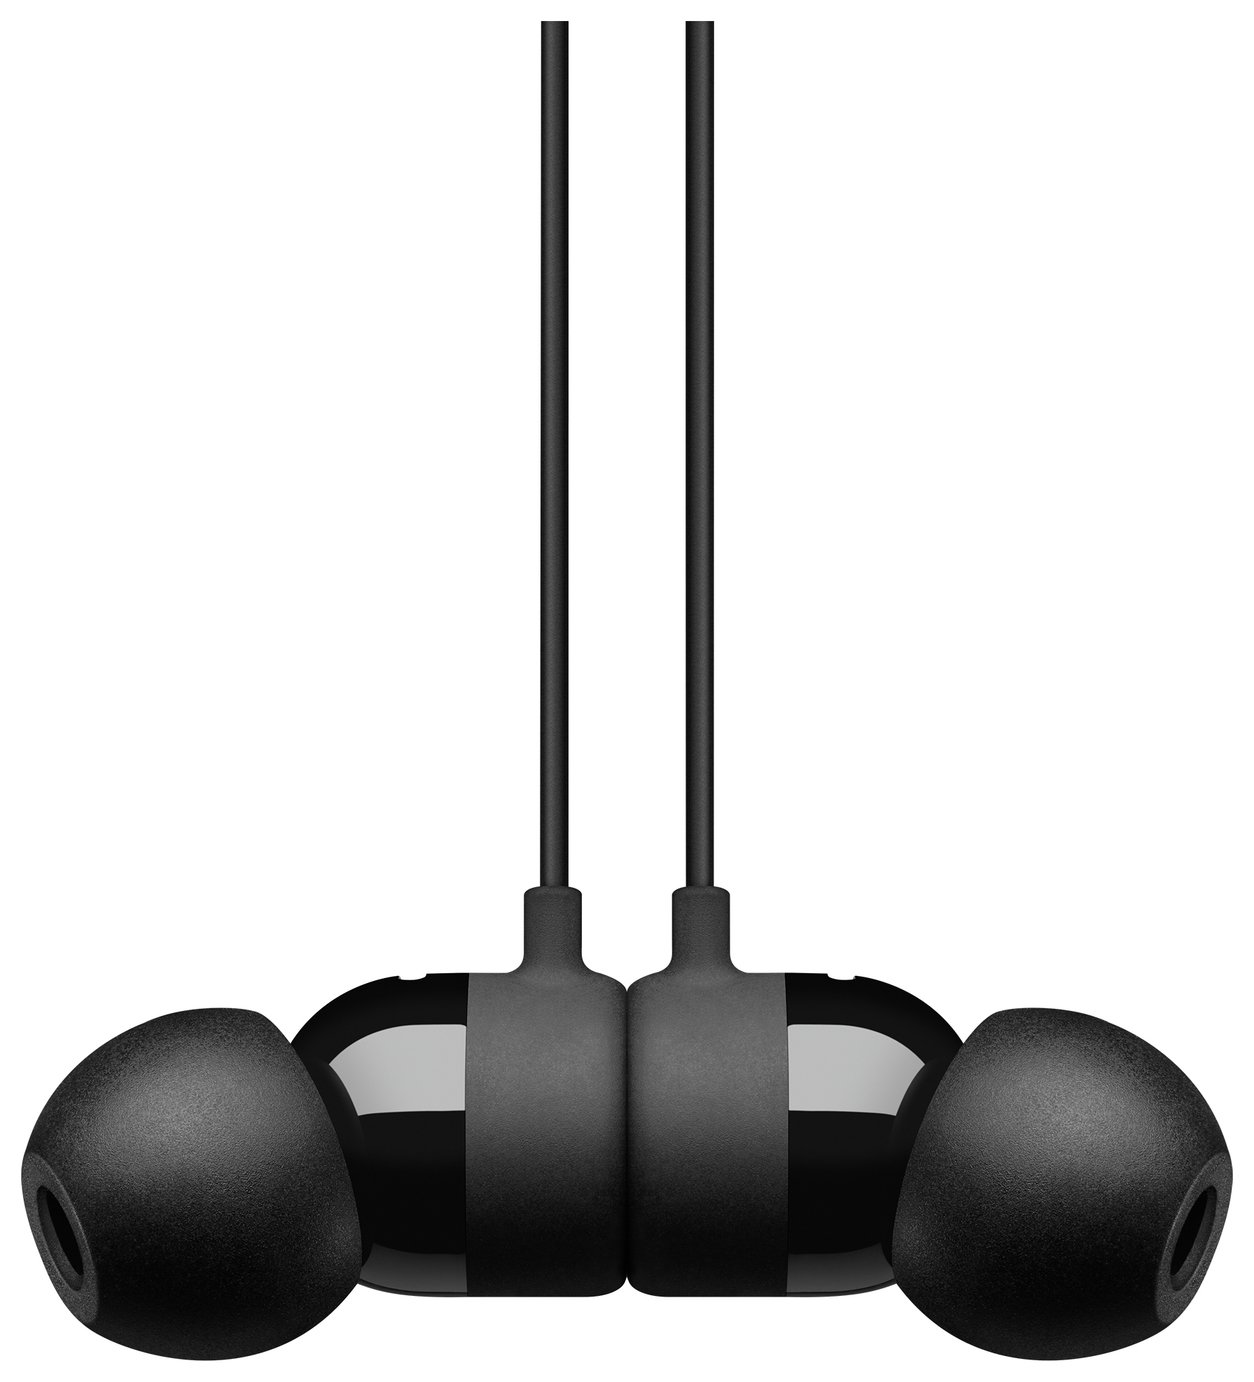 urBeats3 In-Ear Earphones with 3.5mm Plug Review